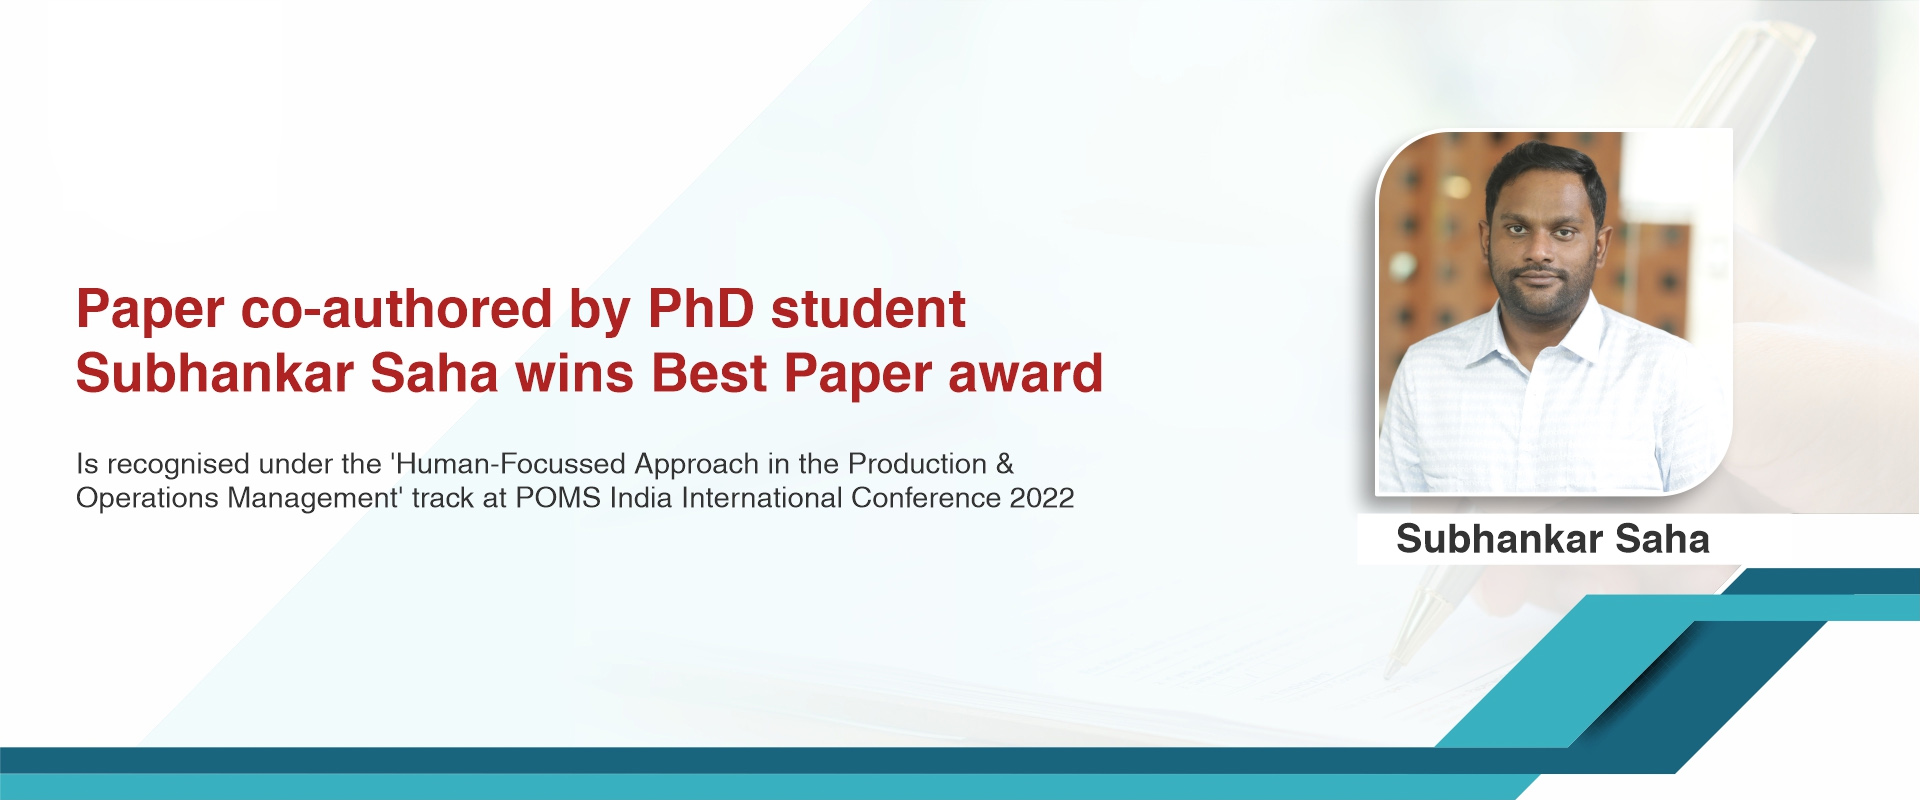 Paper co-authored by PhD student Subhankar Saha wins Best Paper award